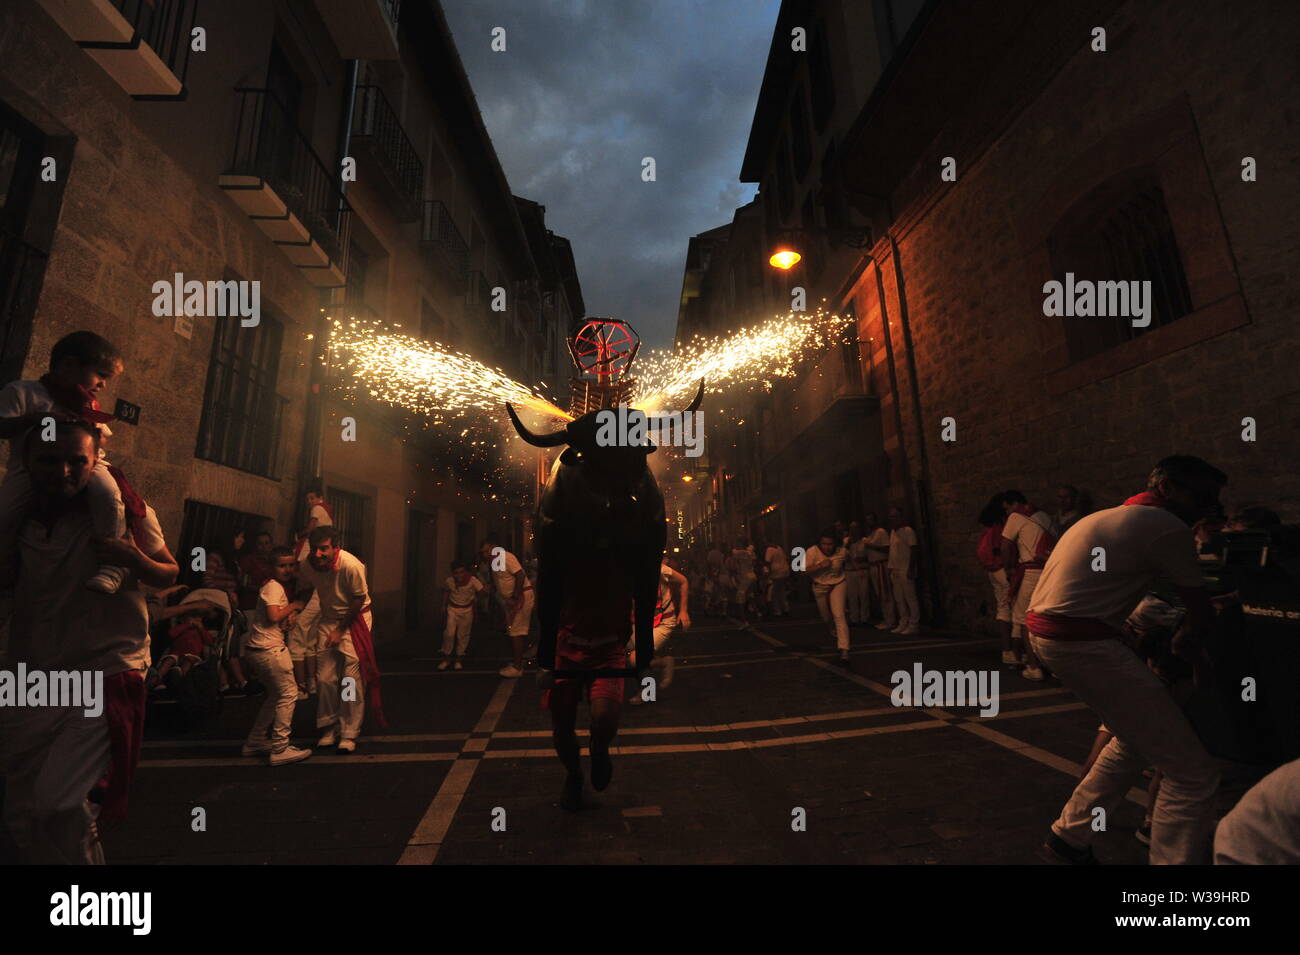 A man runs through the streets with a bull's head and horns that shoot out sparks in all directions during the San Fermin bull running fiesta in Pamplona. The 'Toro de Fuego' is a typical sight every night during the San Fermin fiesta where children have their particular confinement of an artifact made of cardboard carried by a young man. Stock Photo